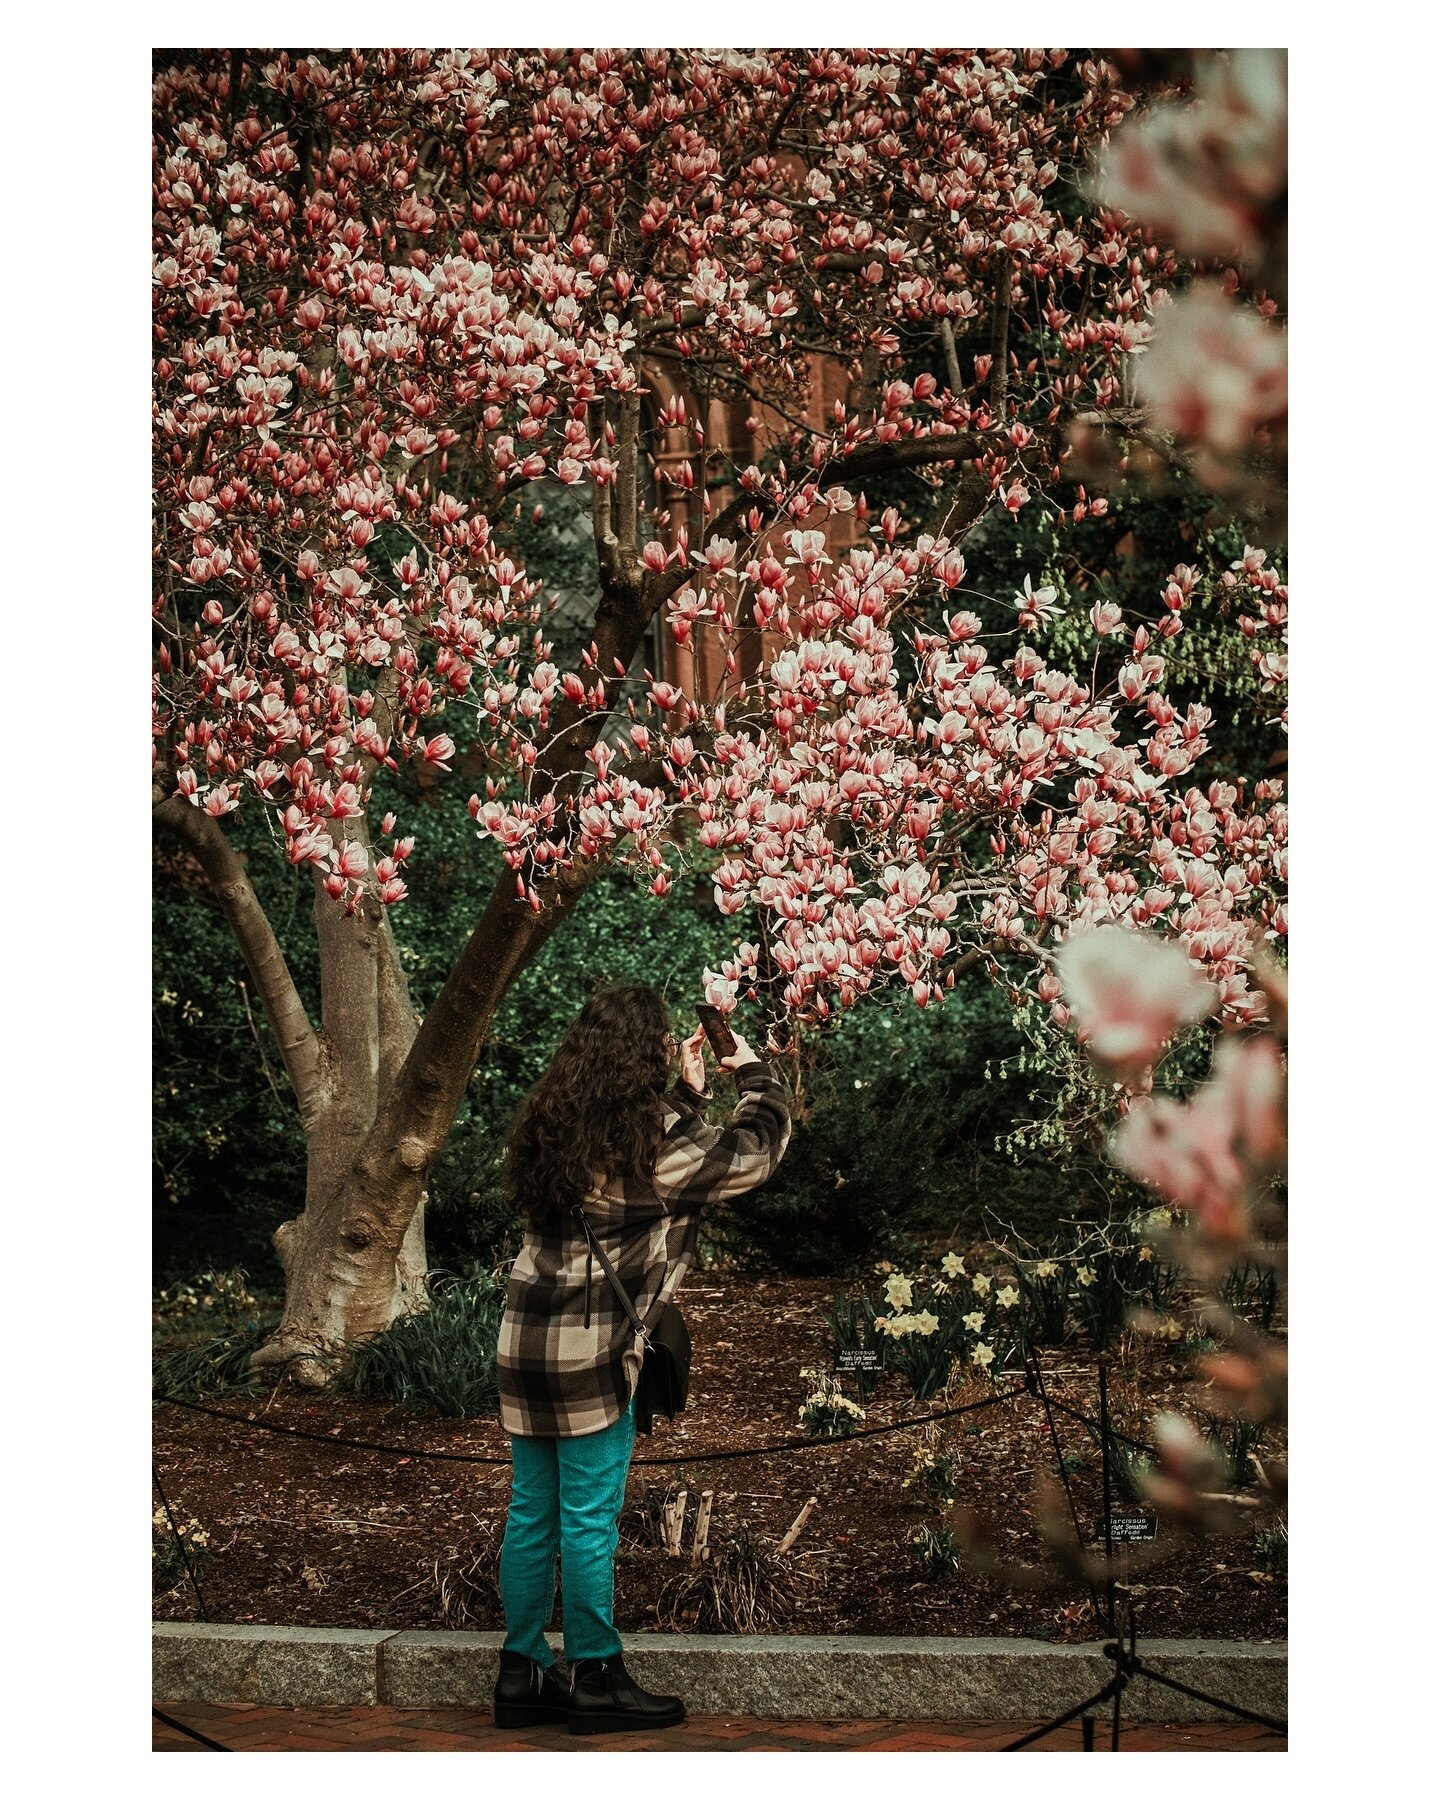 Excited for the cherry blossoms but still love the magnolias 🌷
#jshadowphoto